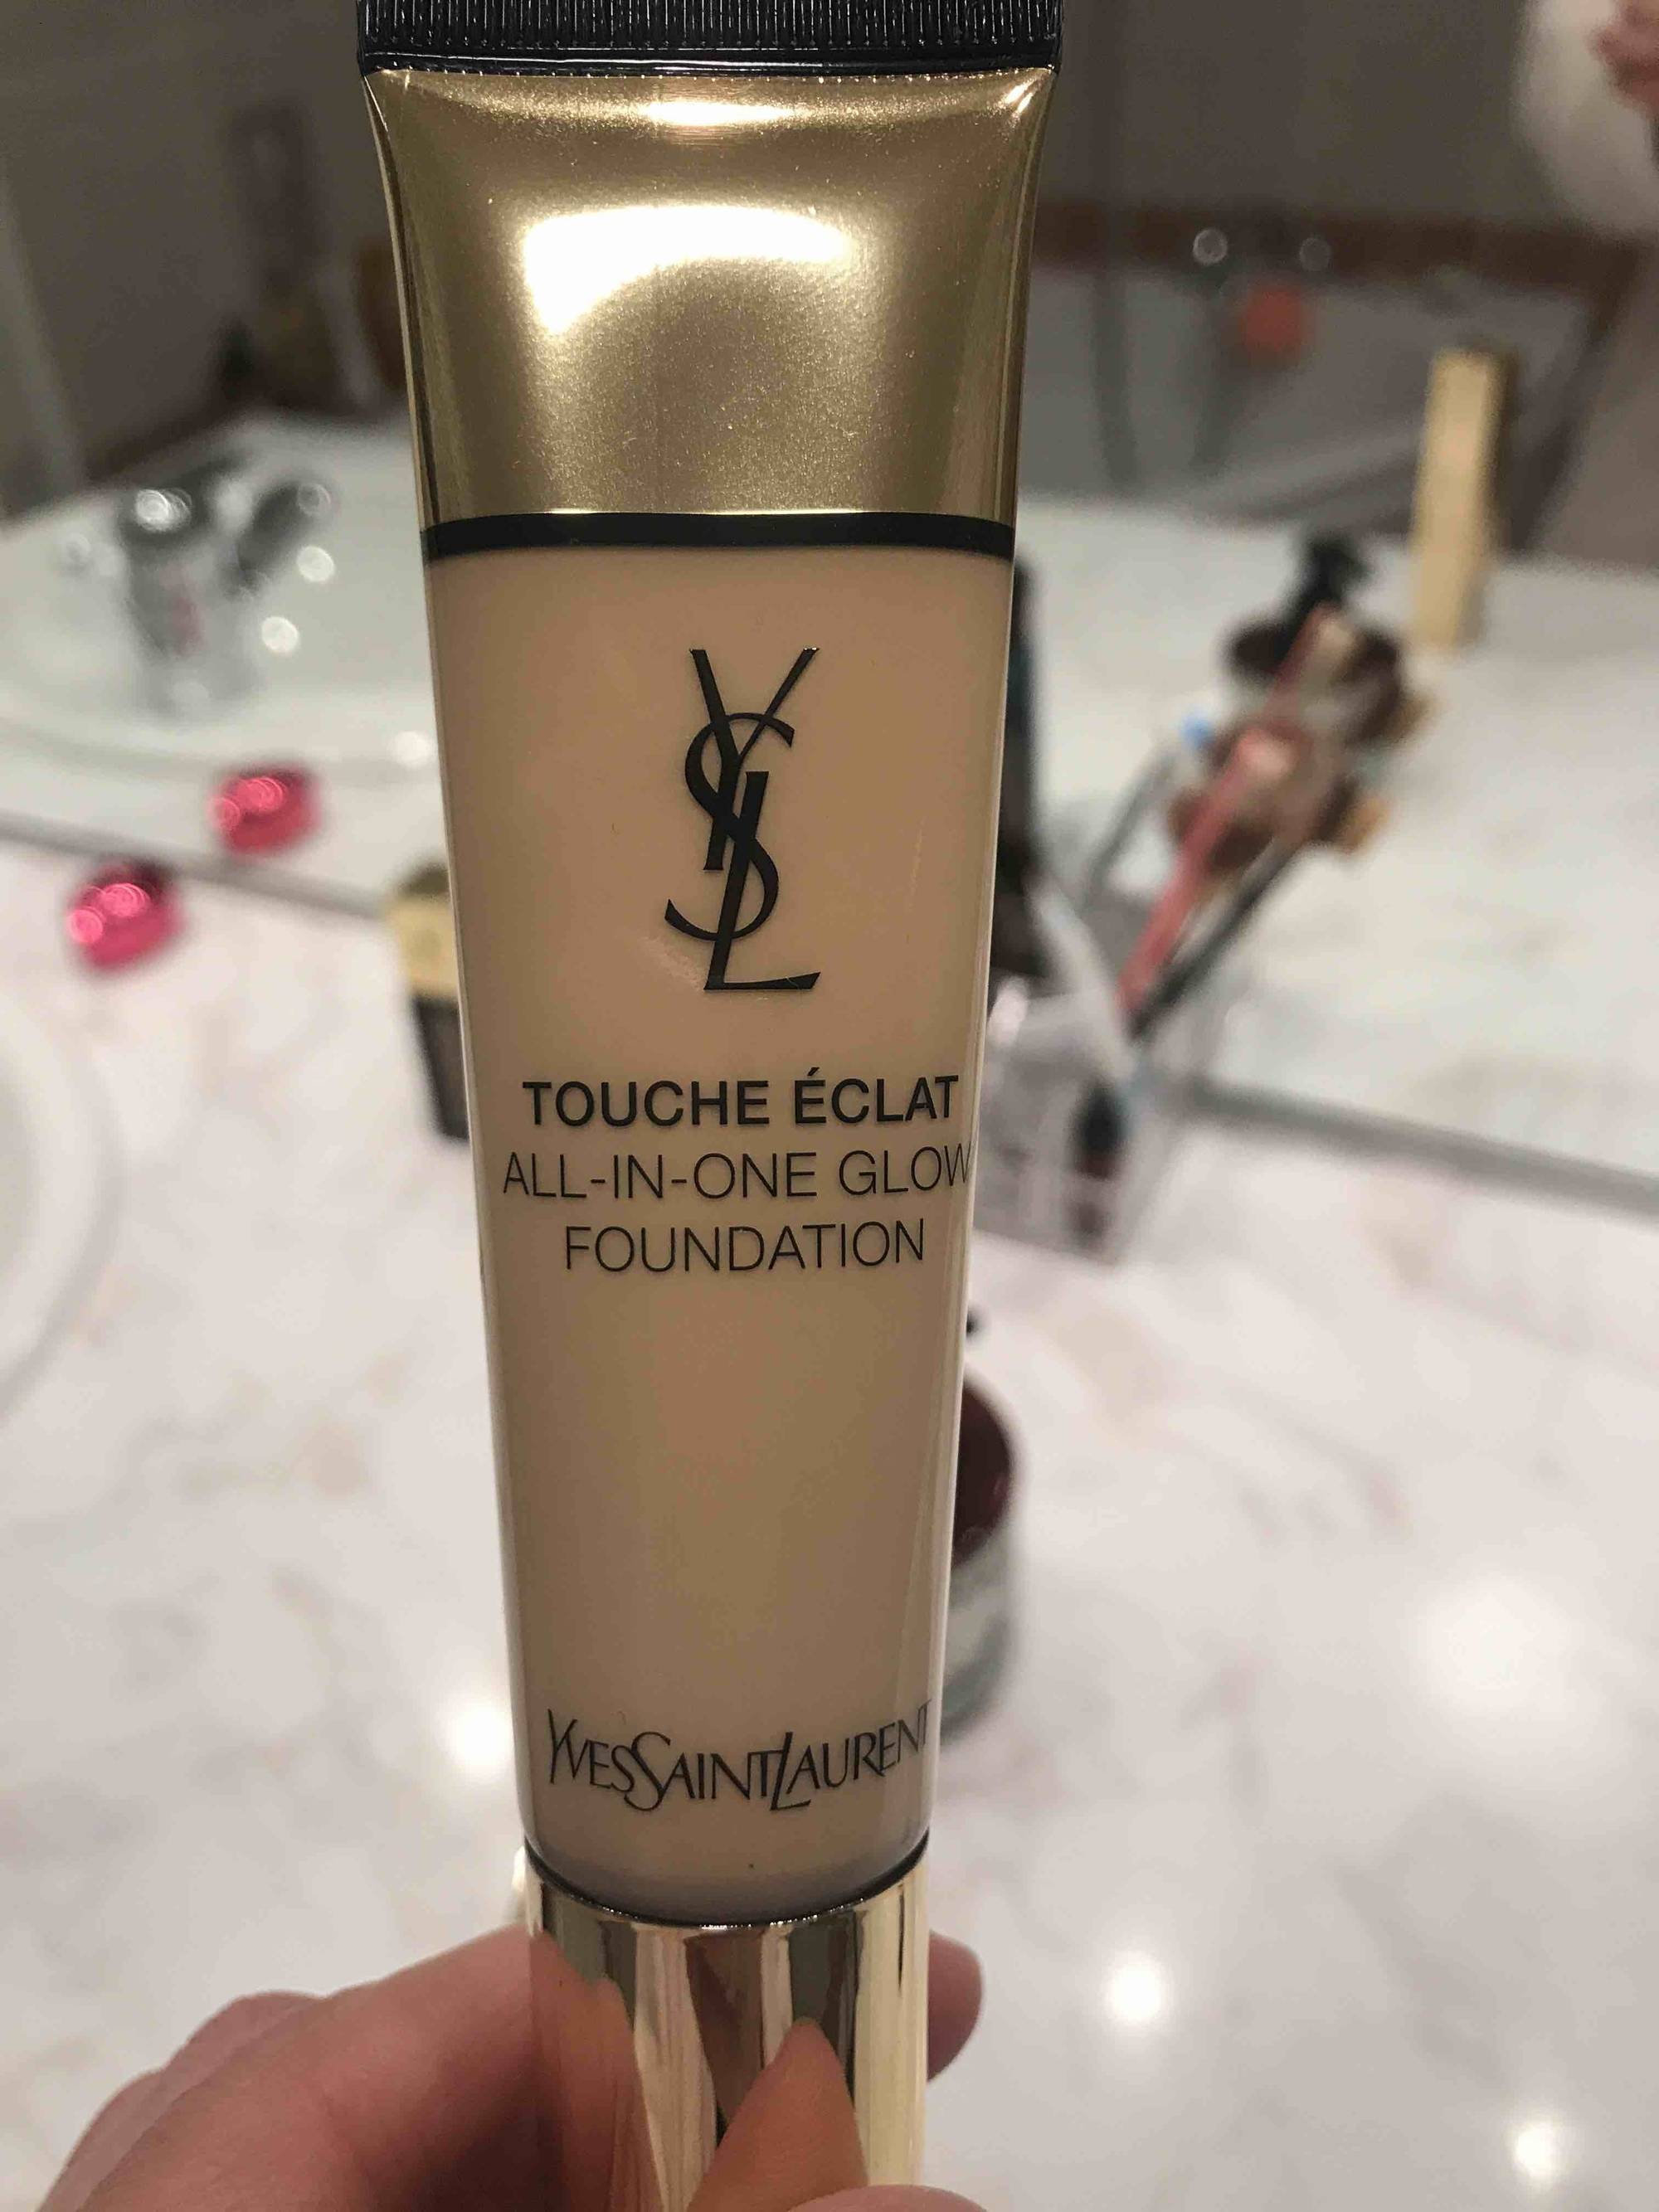 YVES SAINT LAURENT - Touche éclat - All-in-one glow foundation B30 almond